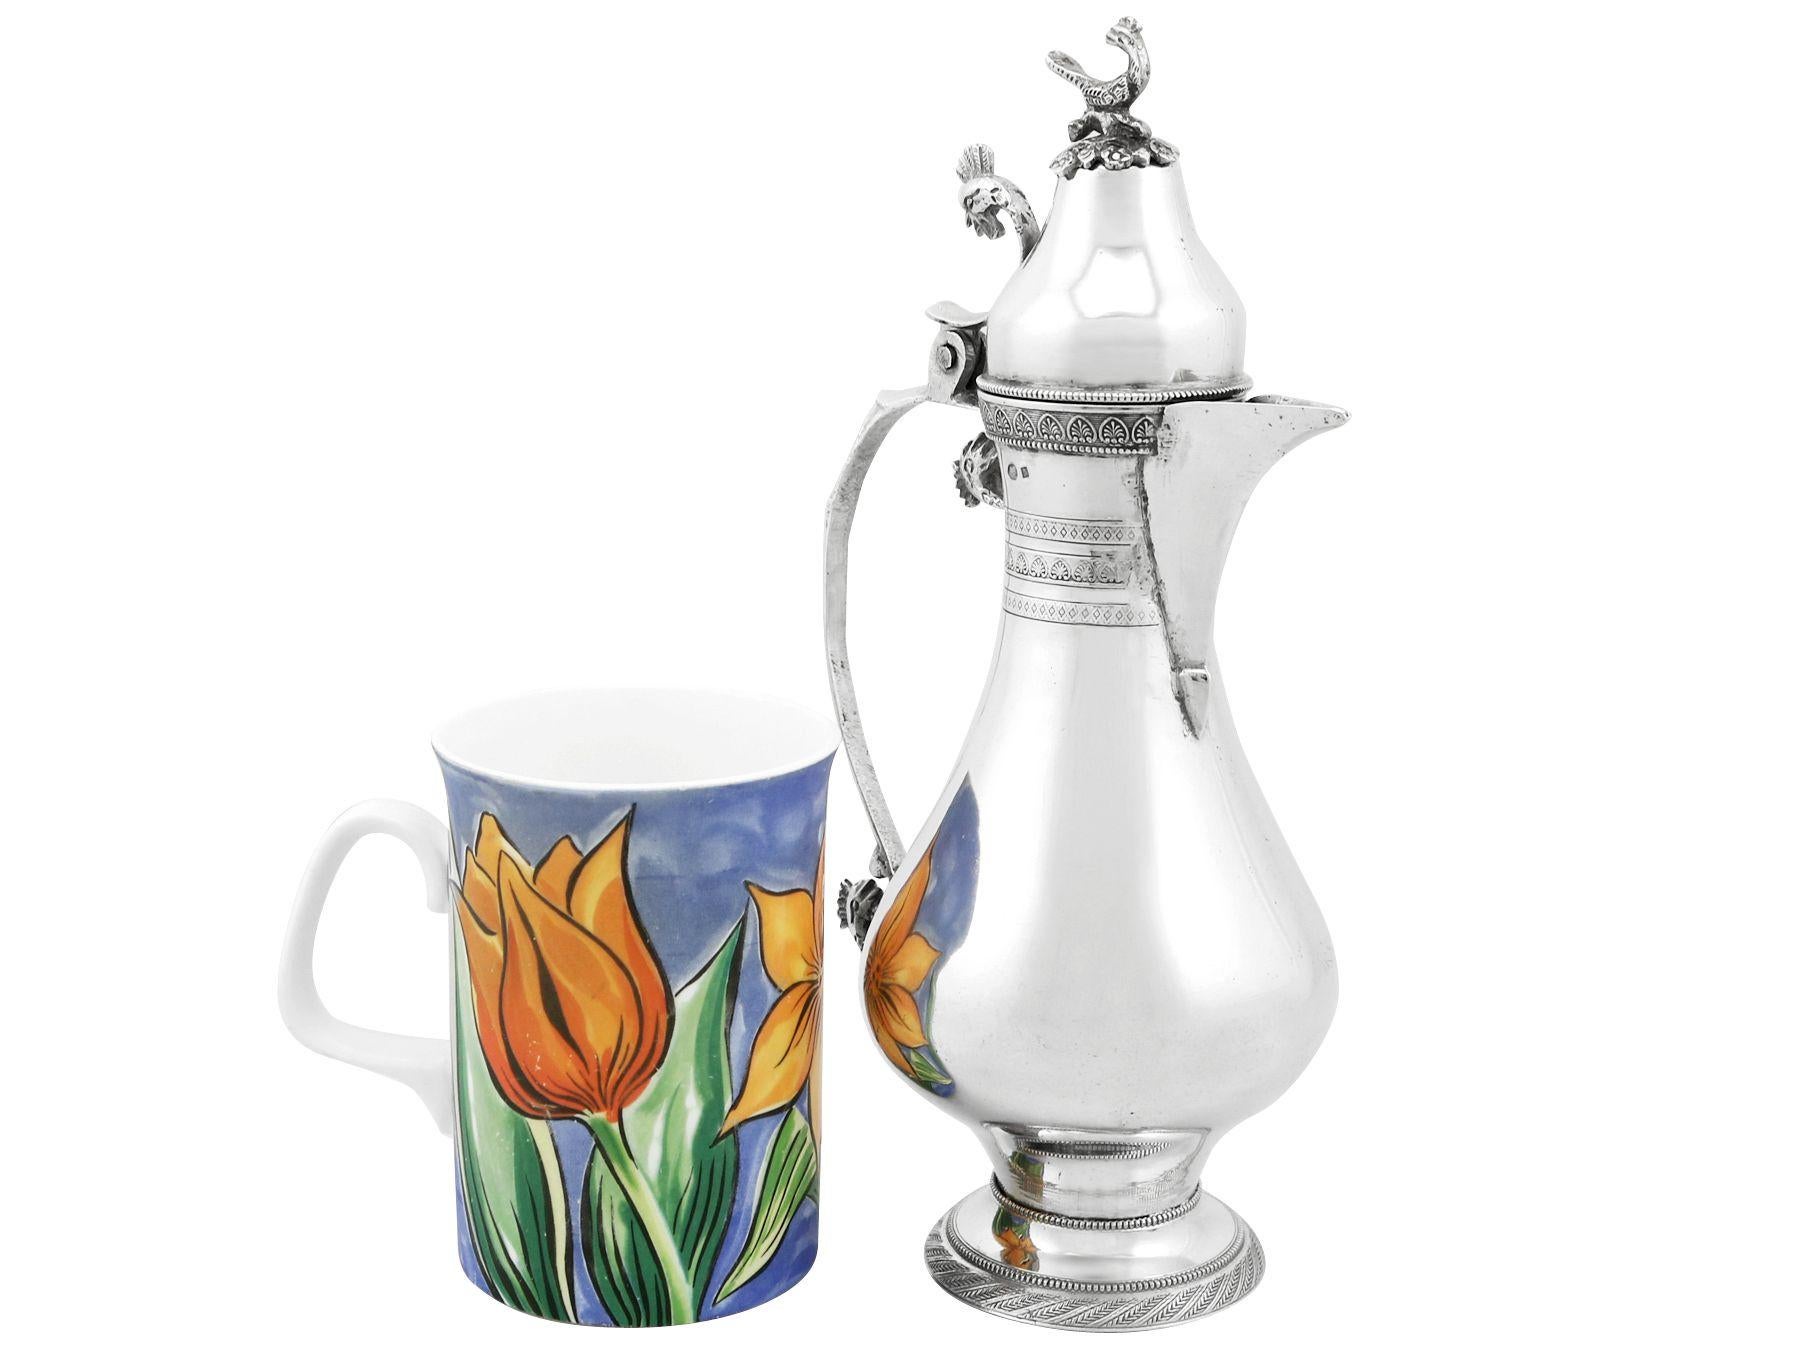 An exceptional, fine and impressive antique Turkish silver coffee jug; an addition to our Asian silver teaware collection.

This exceptional antique Turkish silver coffee jug has a baluster shaped form to a circular spreading foot.

The surface